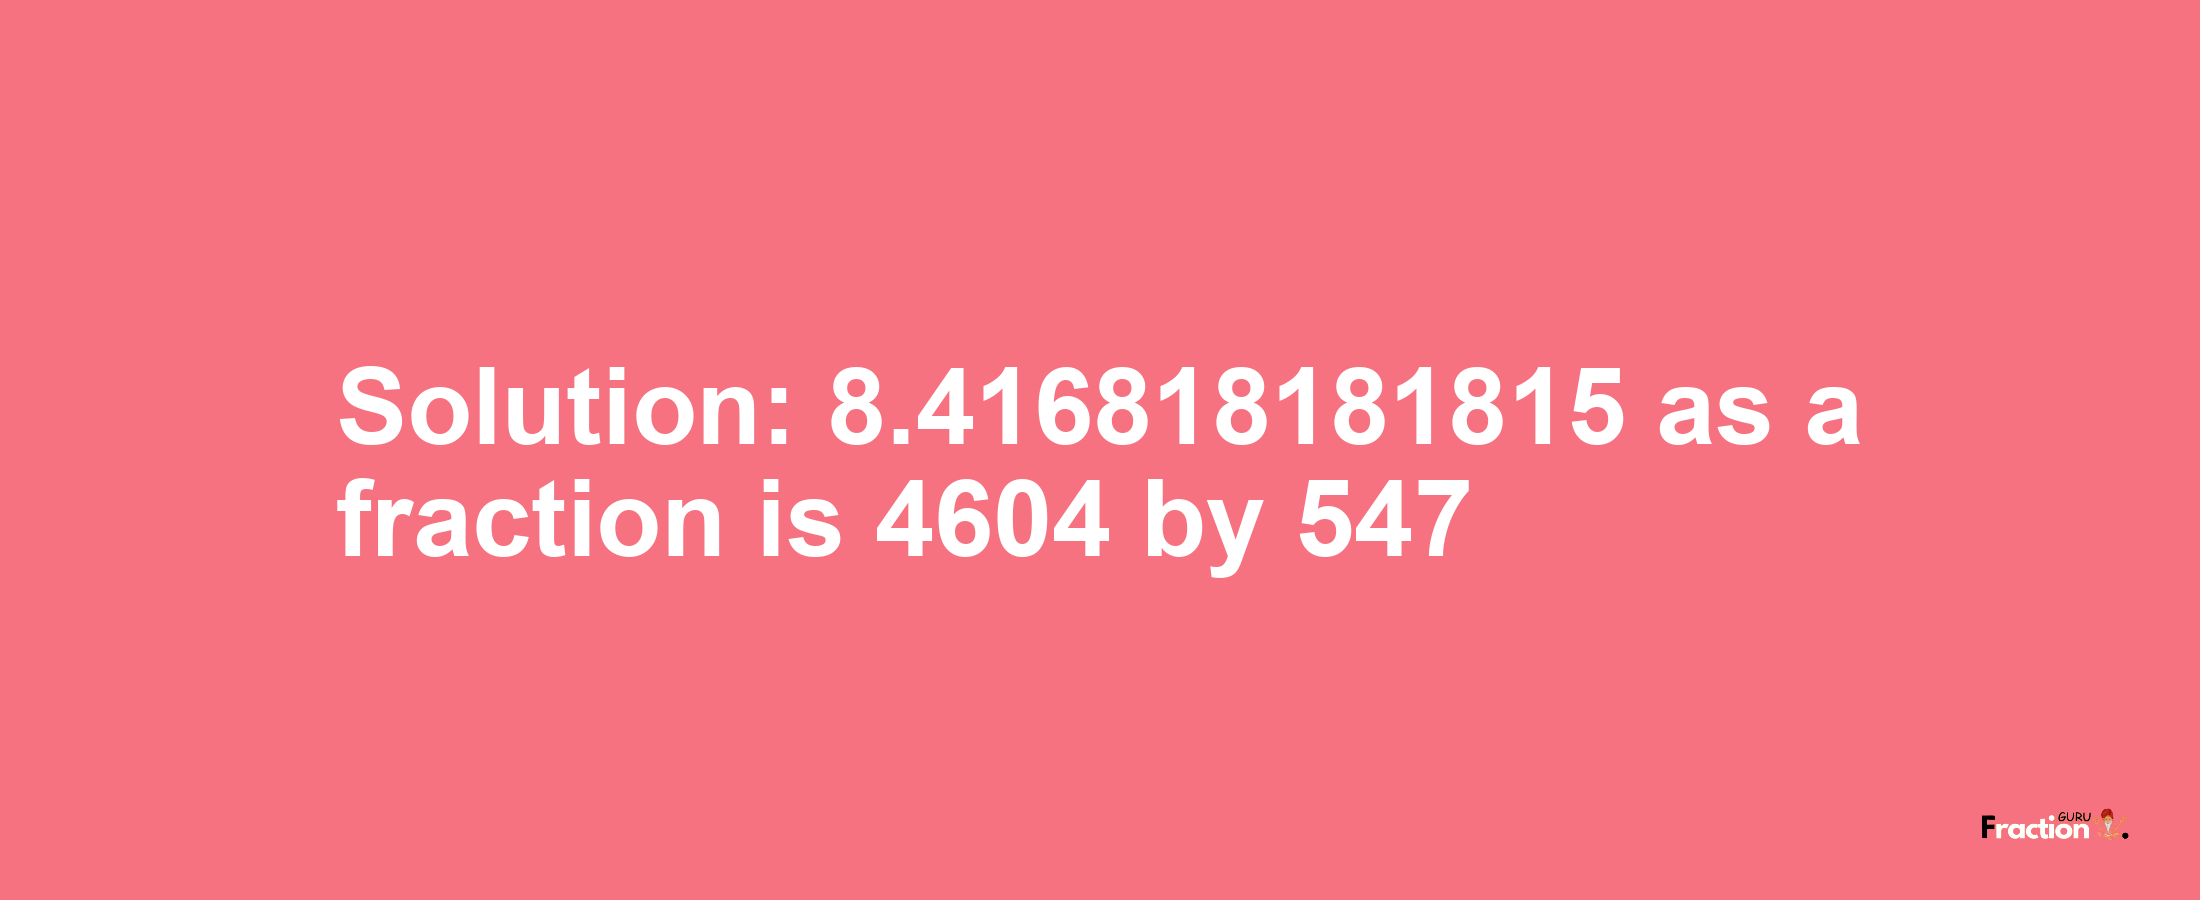 Solution:8.416818181815 as a fraction is 4604/547